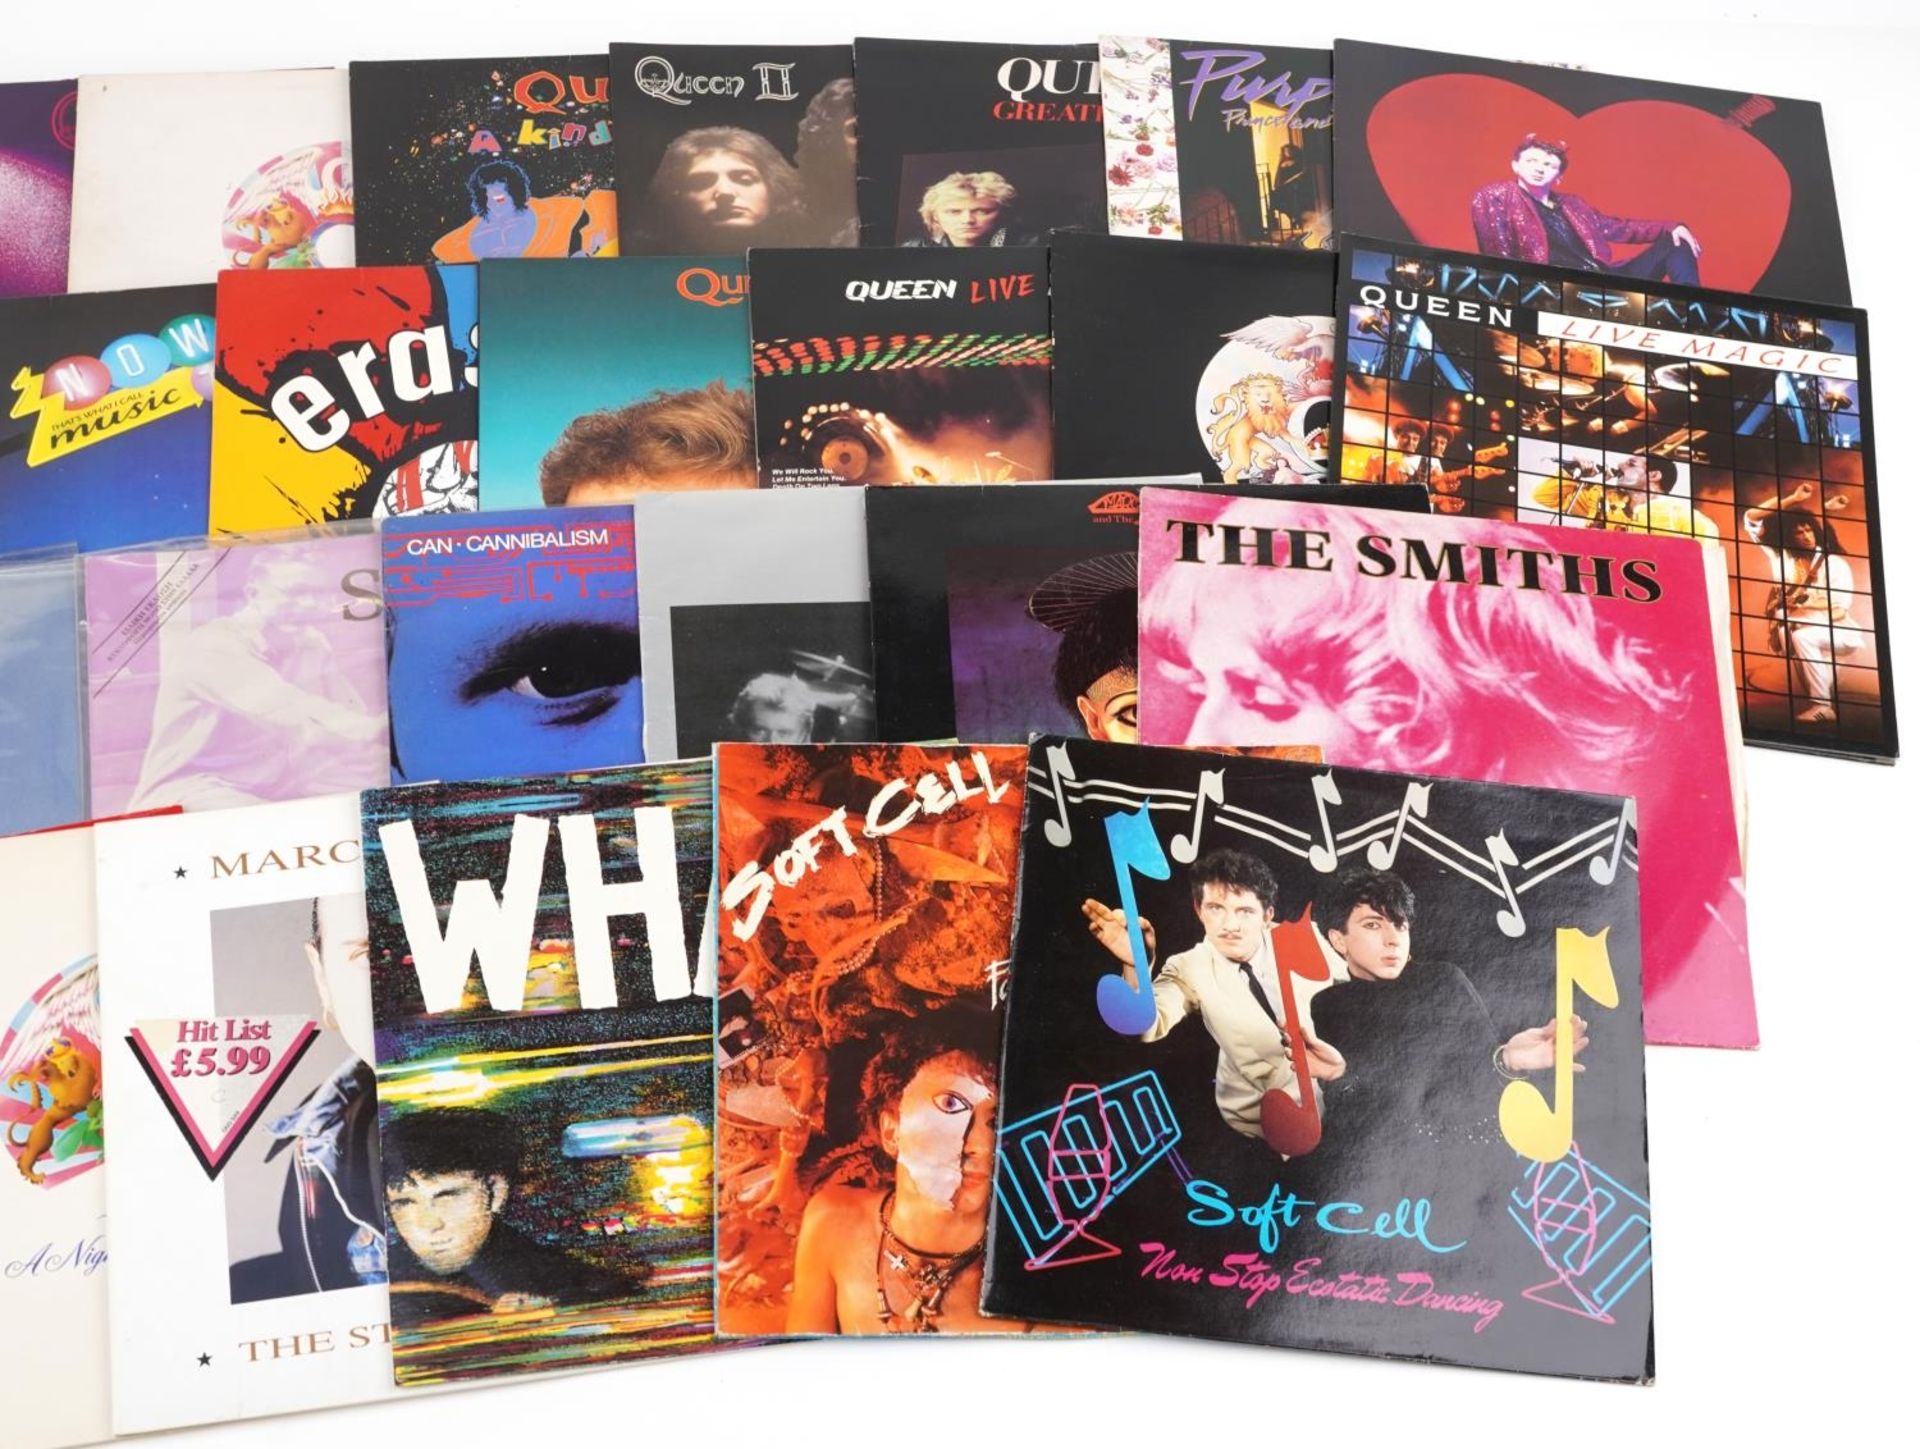 Vinyl LP records including The Smiths, Simple Minds and Queen : For further information on this - Image 3 of 3